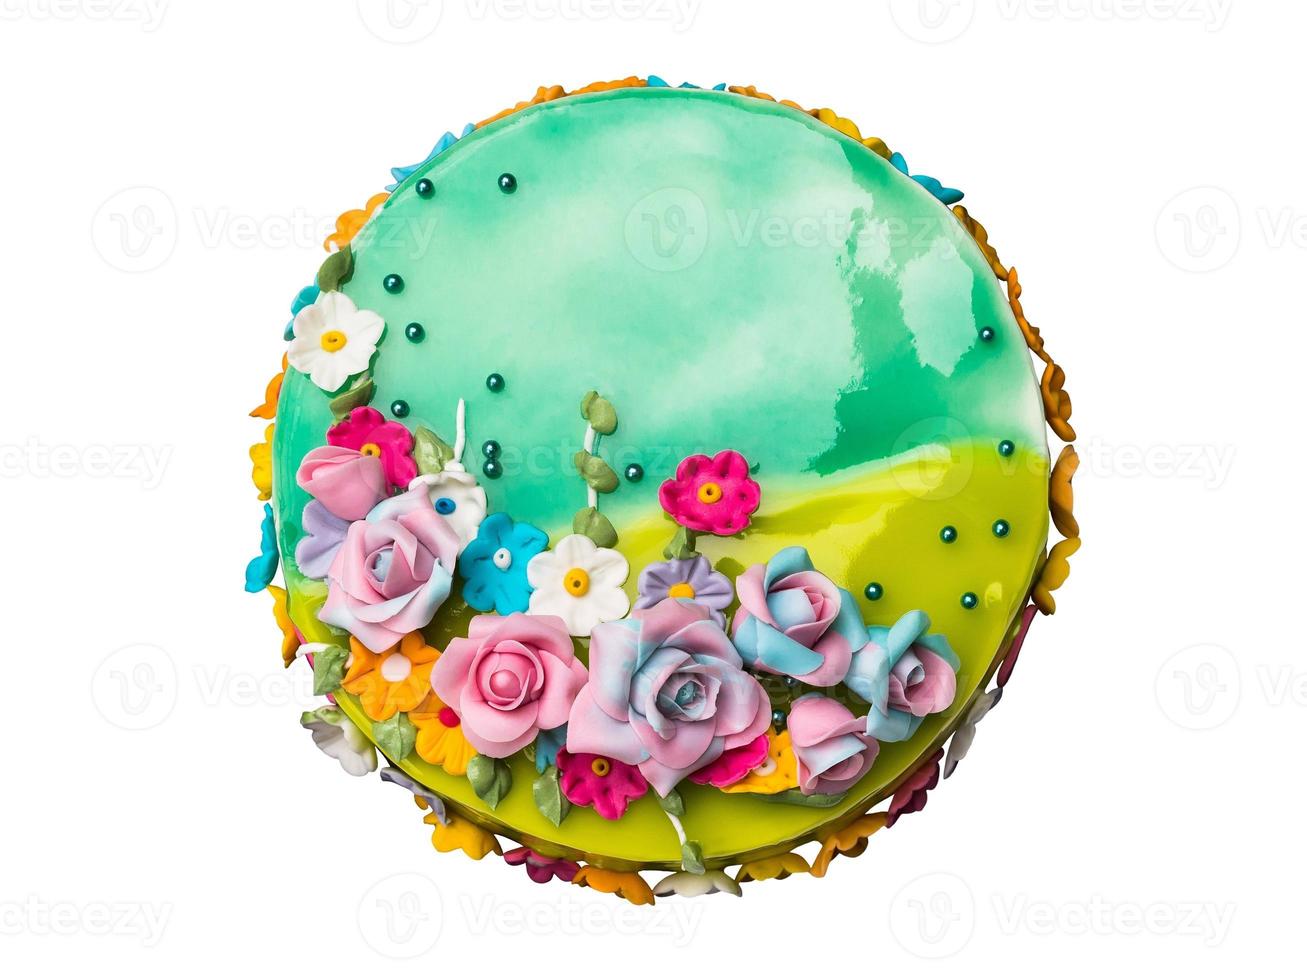 Top view Lemon jam and Green apple jam cake decorations with Colorful Icing fruits photo